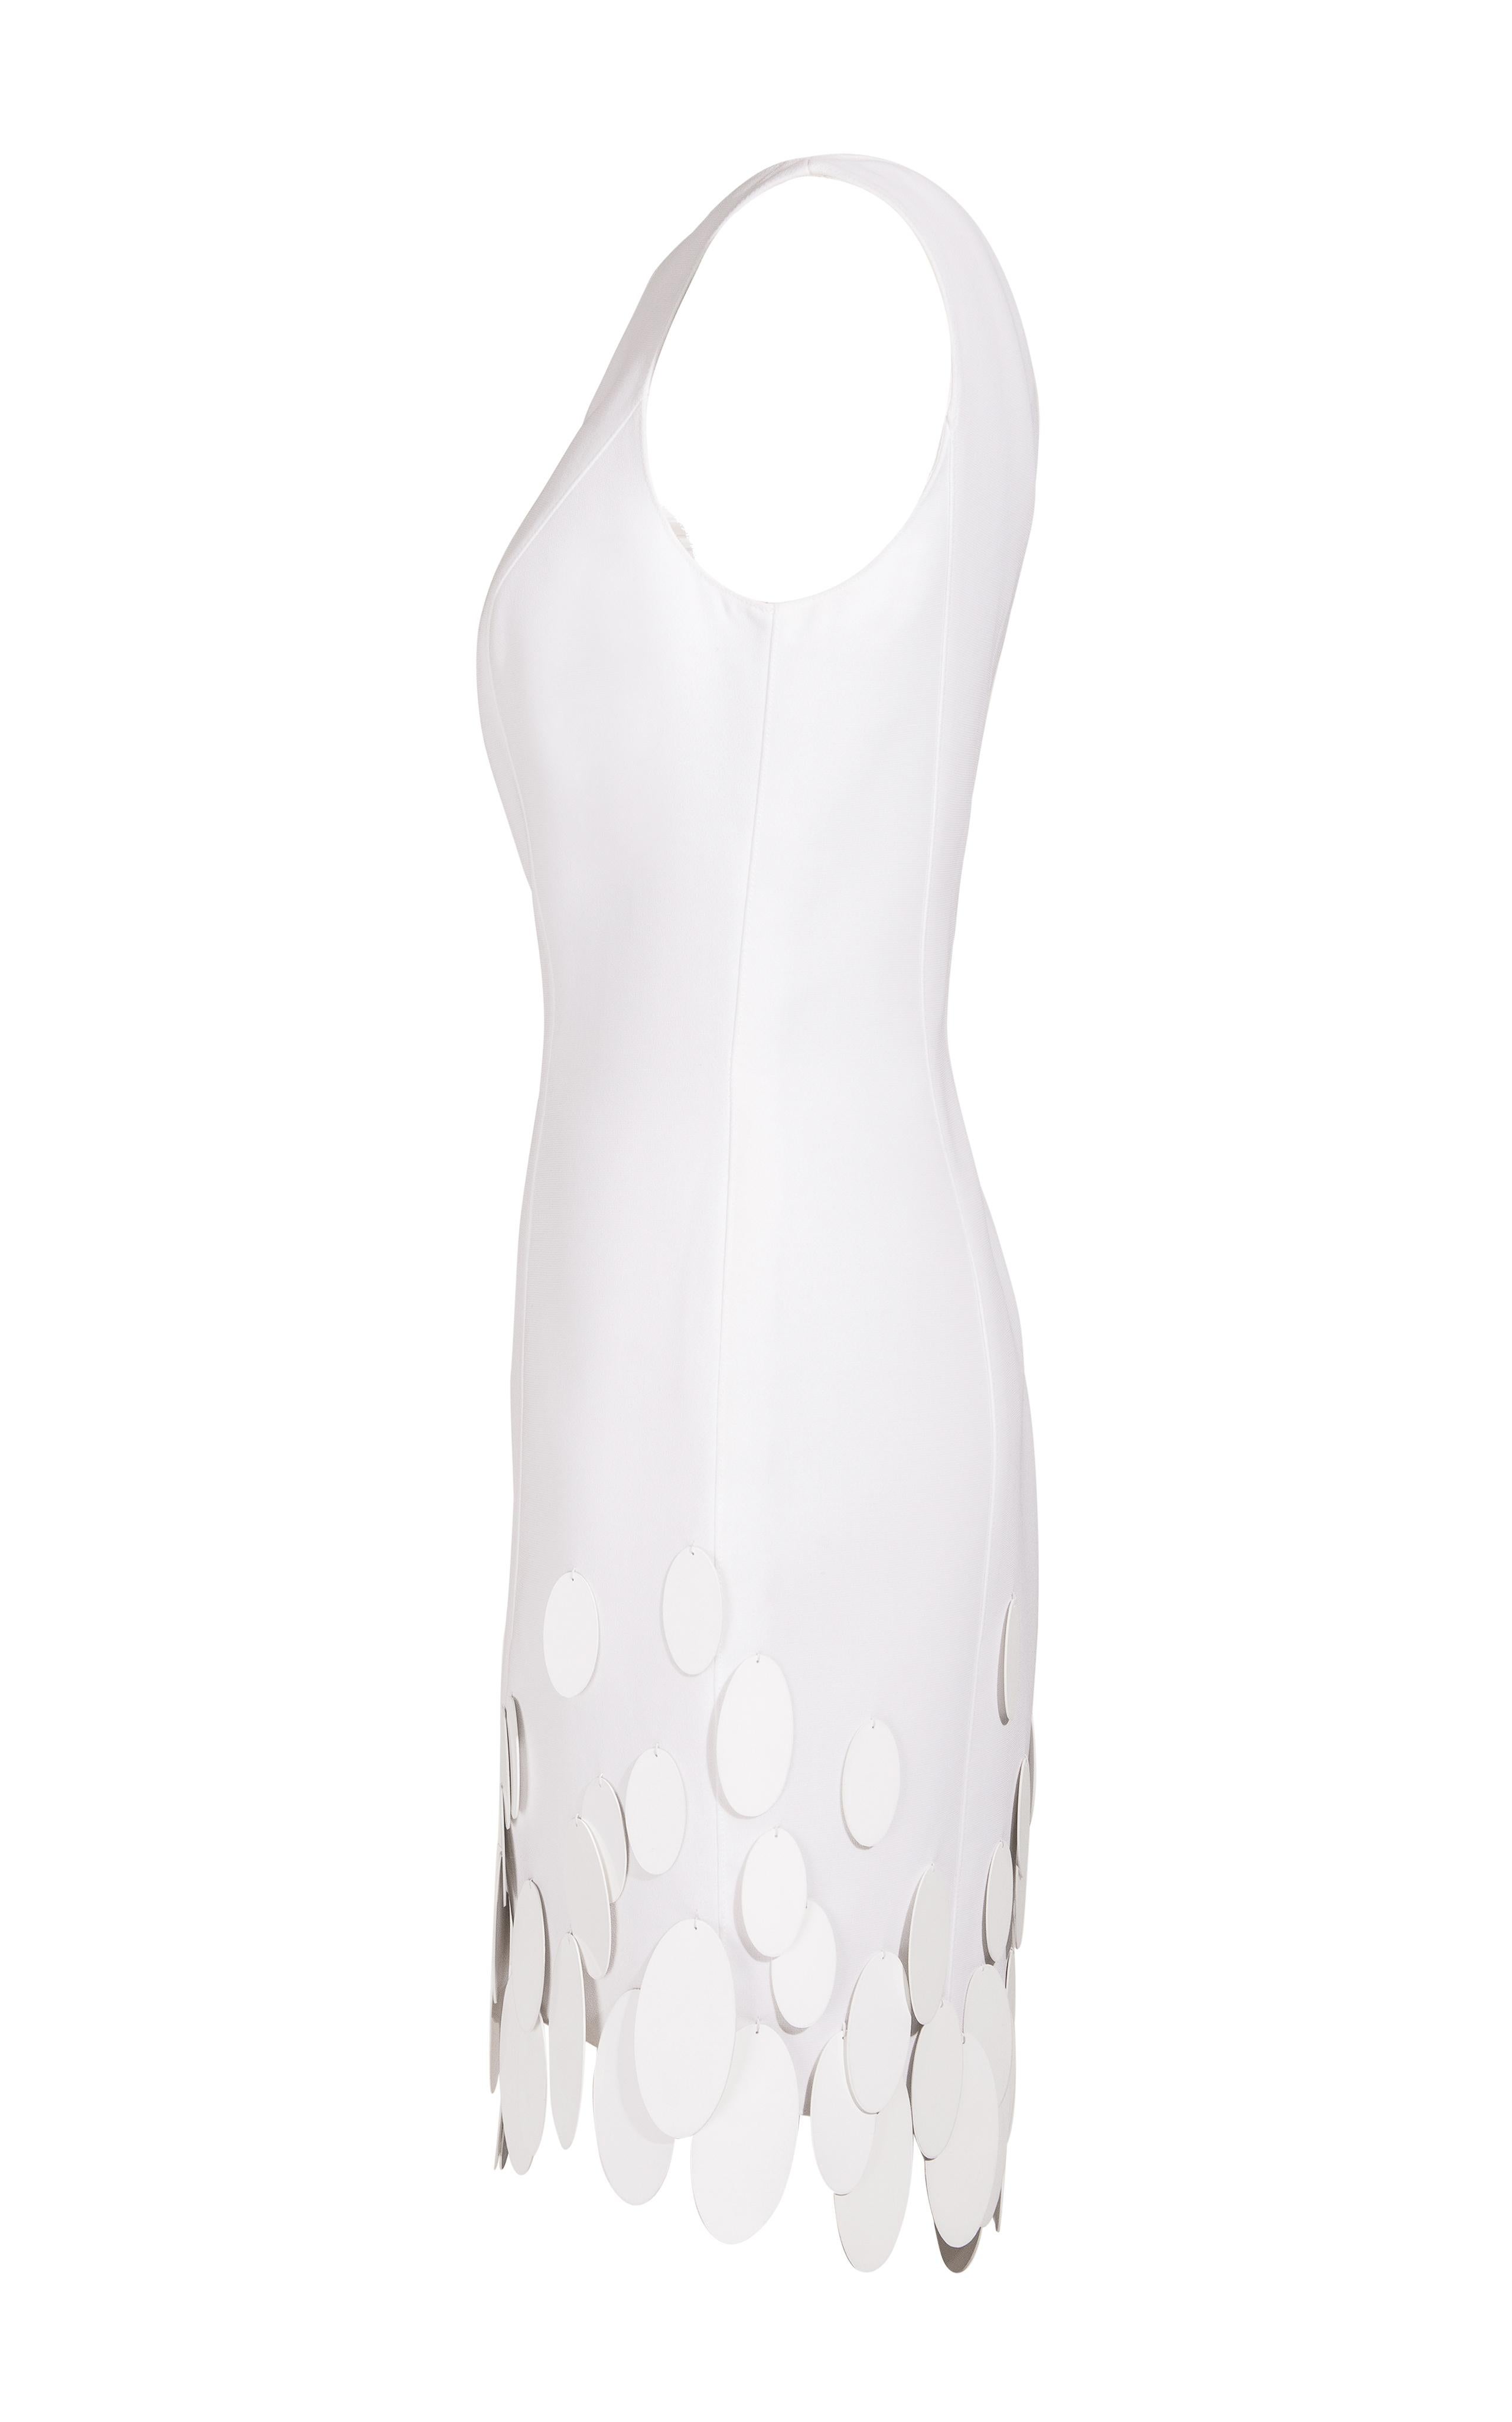 S/S 1999 Thierry Mugler Asymmetrical White Dress with Oval Paillette 'Fringe' In Excellent Condition In North Hollywood, CA